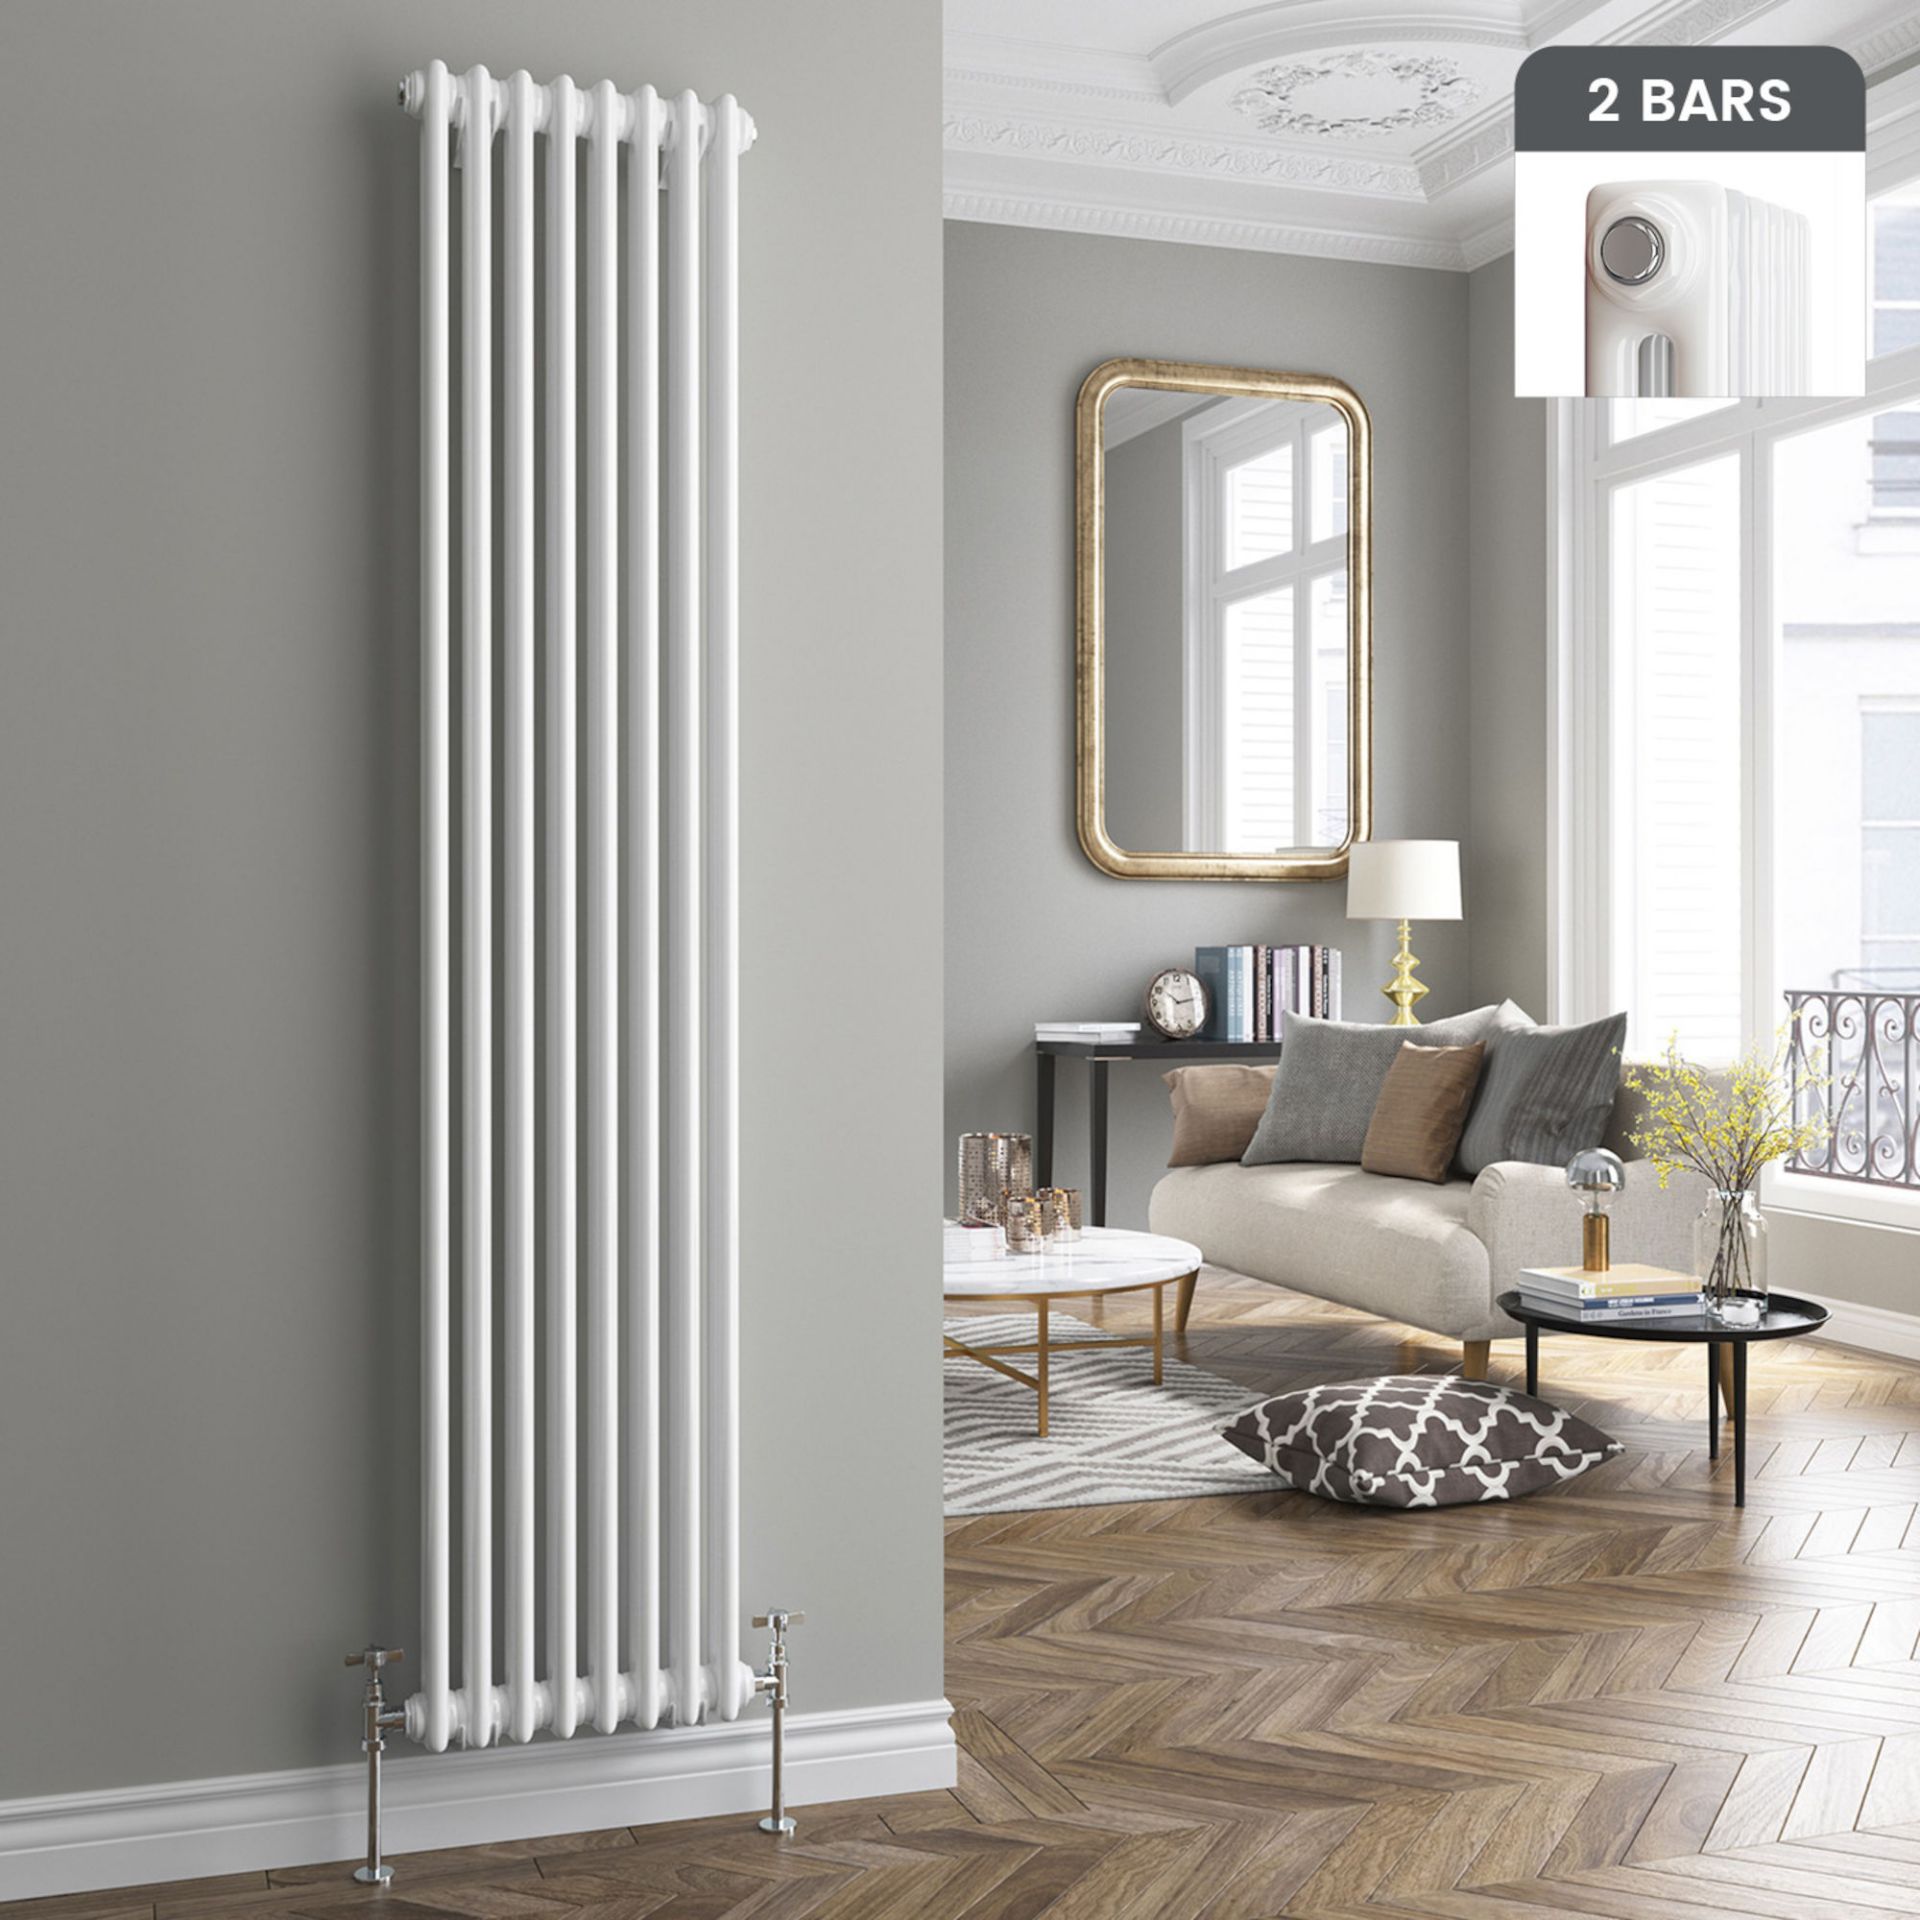 (G77) 2000x306mm White Double Panel Vertical Colosseum Traditional Radiator. RRP £328.99.Made...